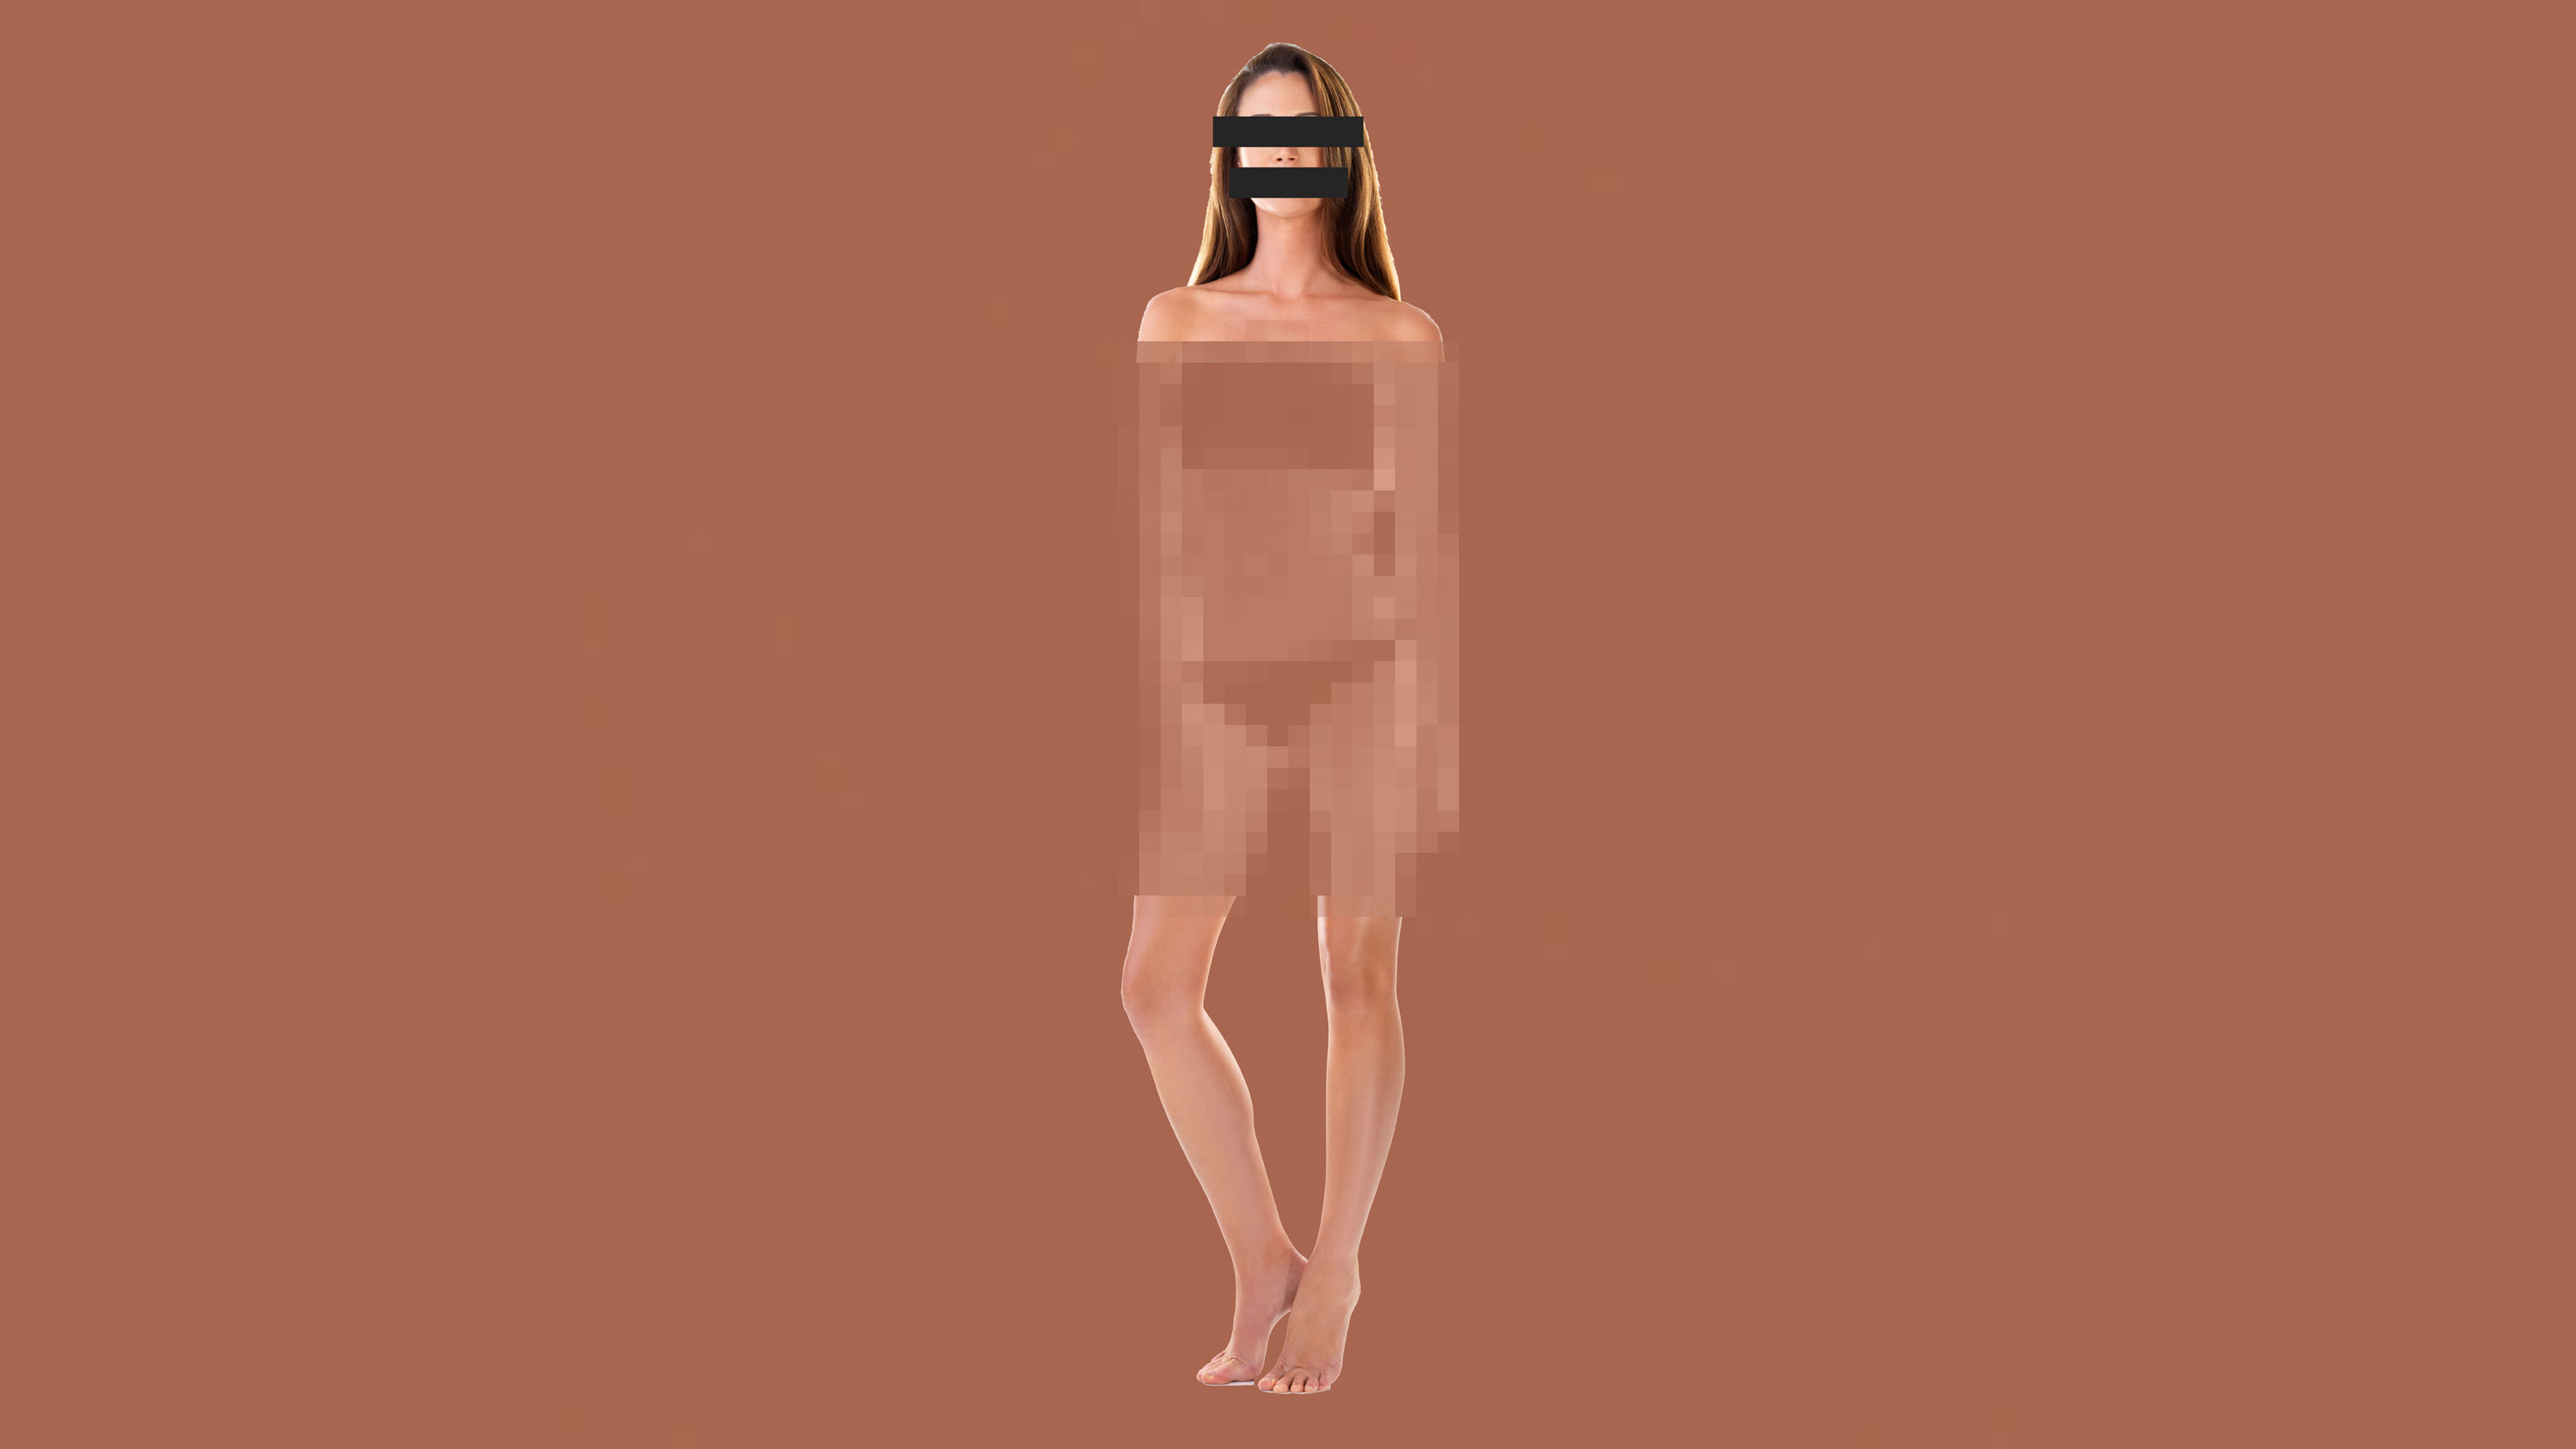 How Can We Do Rape Of Girls Without Clothes - An AI app that â€œundressedâ€ women shows how deepfakes harm the most  vulnerable | MIT Technology Review